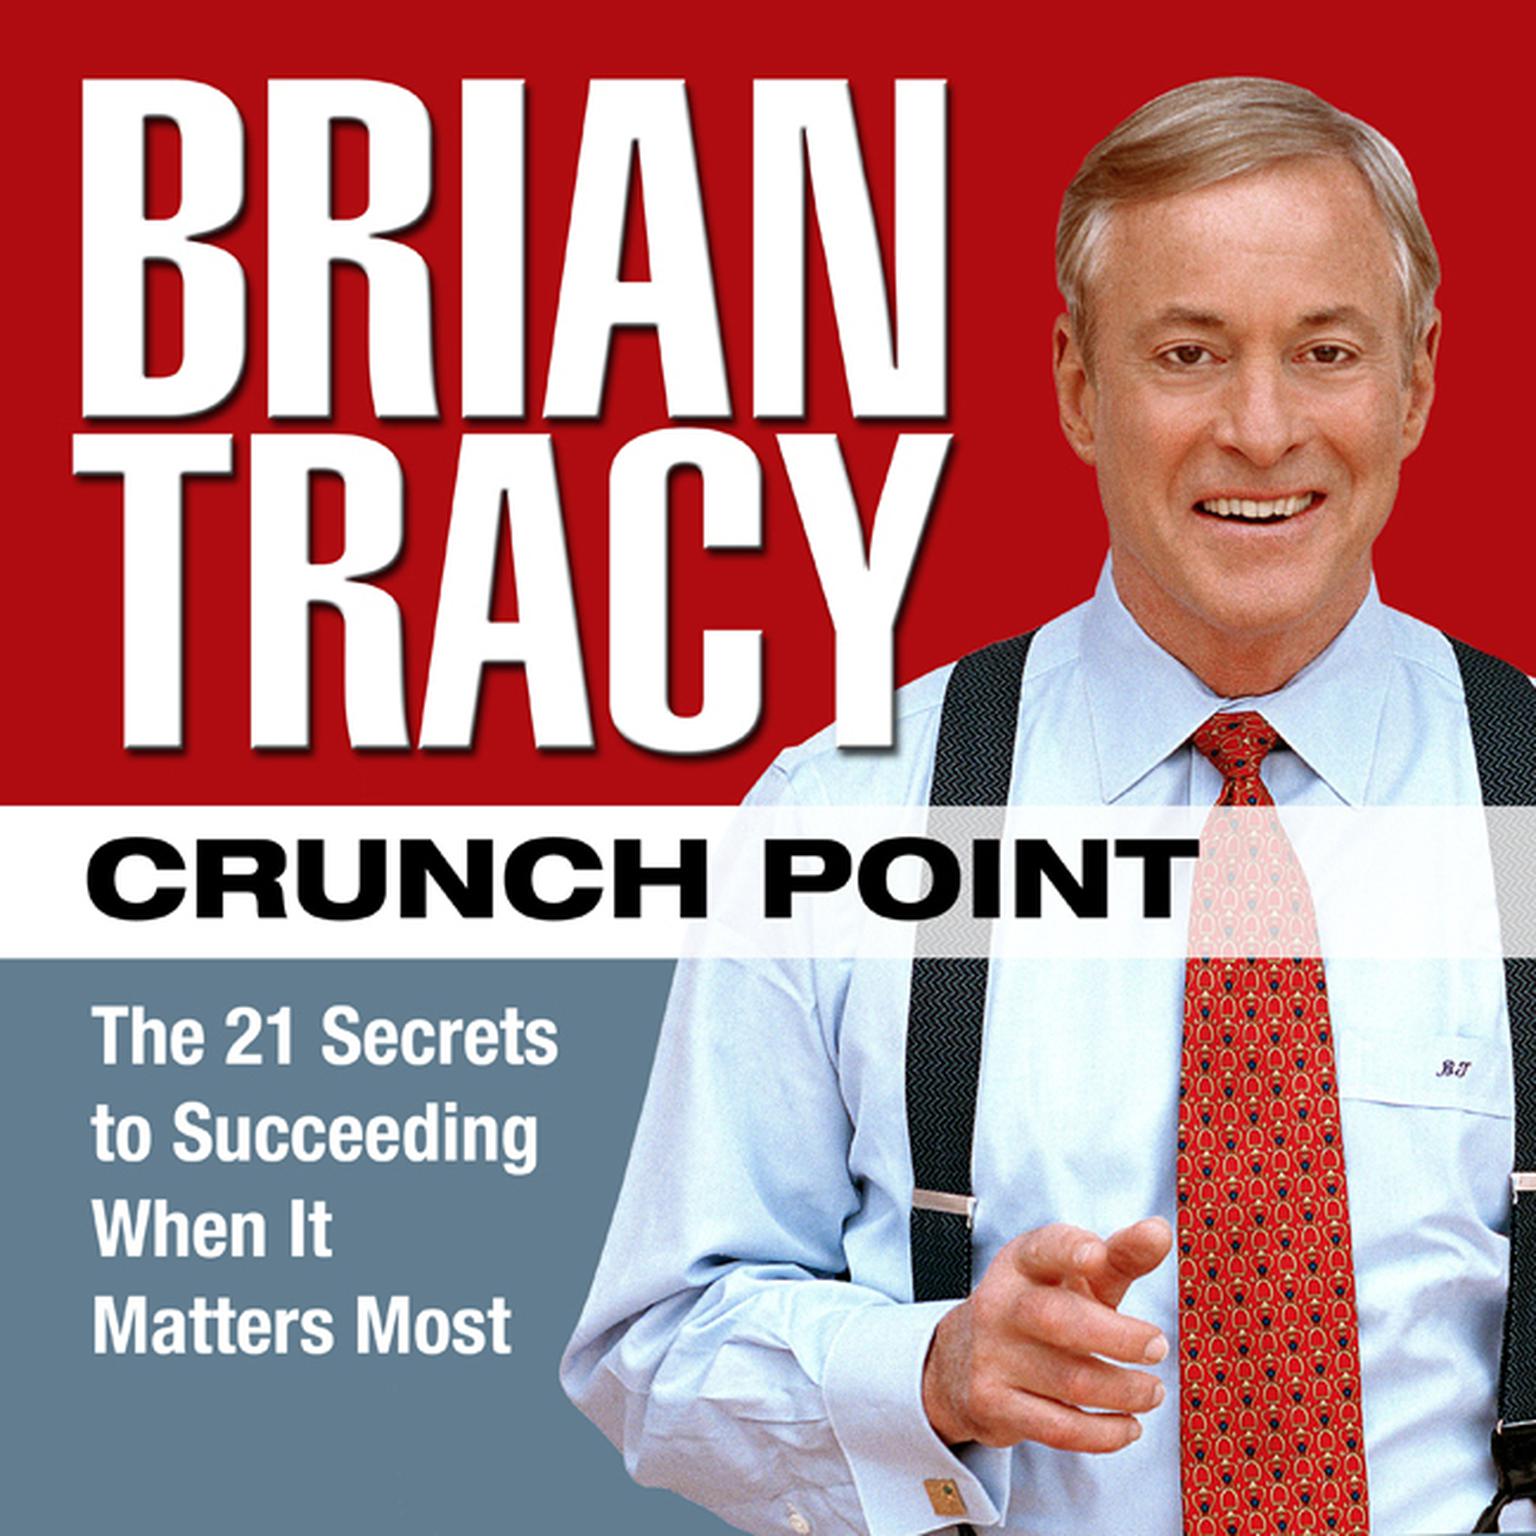 Crunch Point: The 21 Secrets to Succeeding When It Matters Most Audiobook, by Brian Tracy